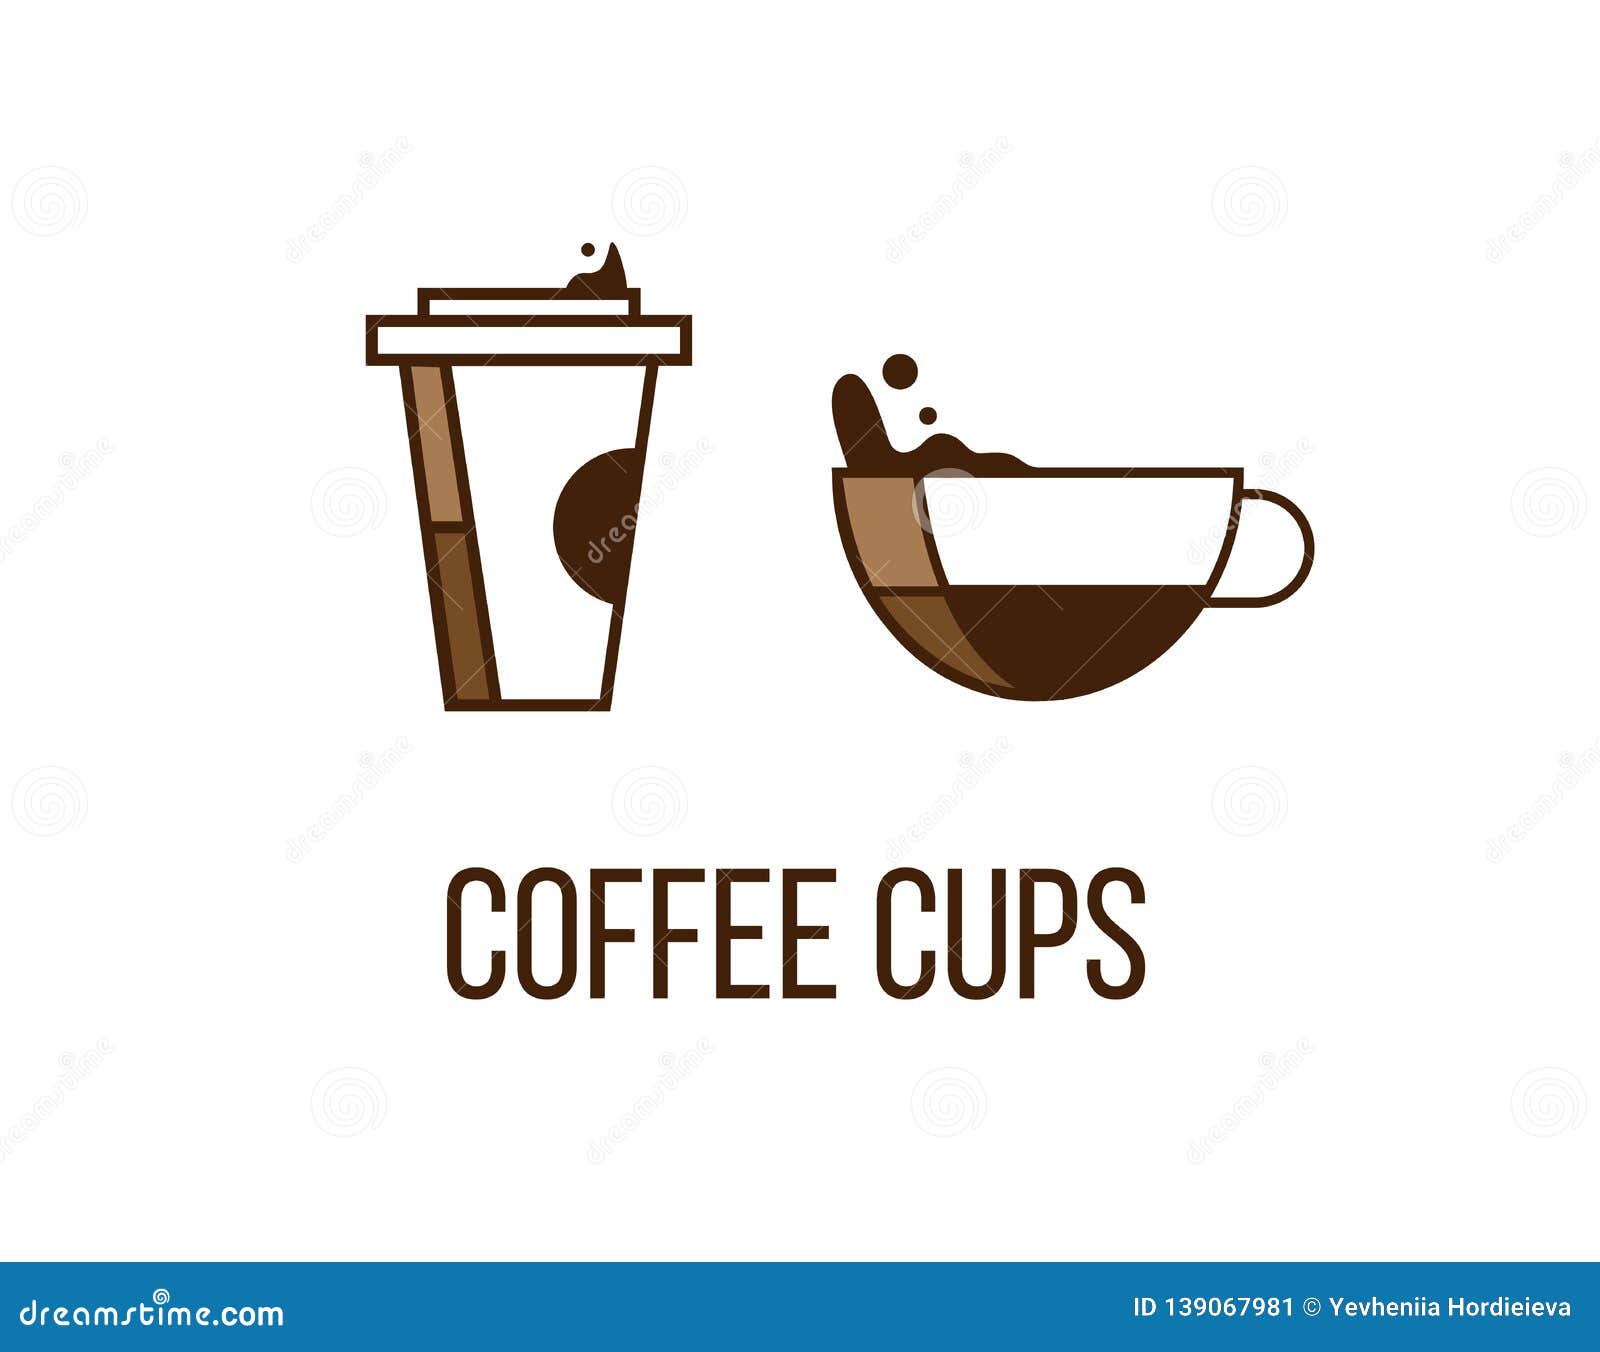 Logo Coffee paper cup stock vector. Illustration of latte - 15349190